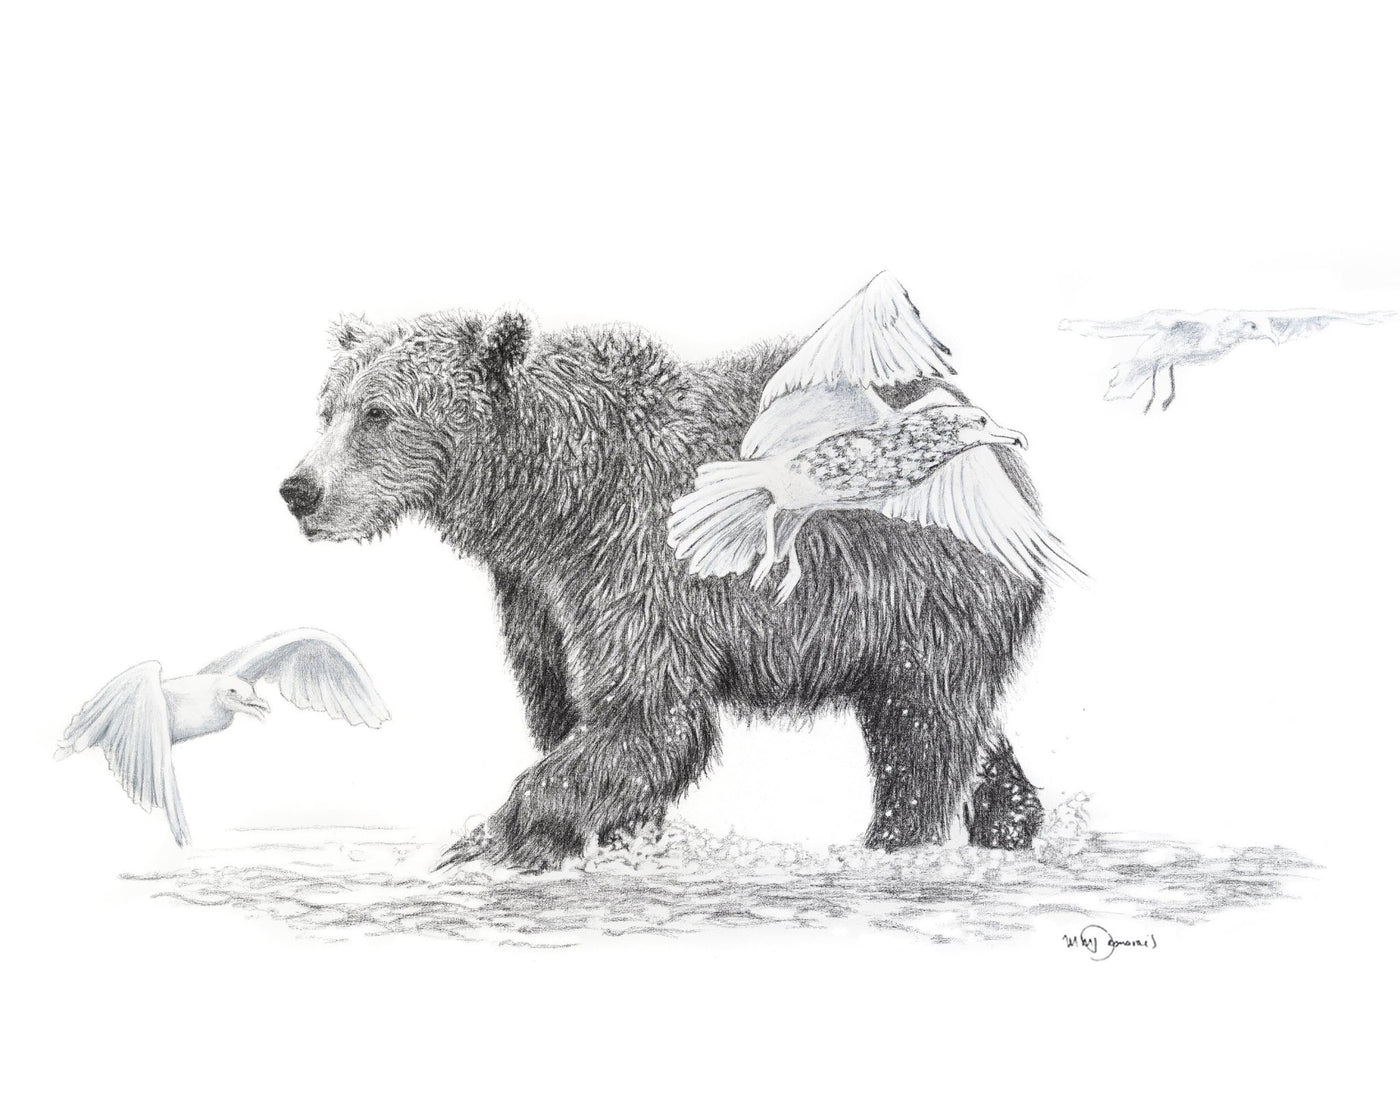 **SOLD- Original Artwork - Grizzly Bear Walking in water with birds - 36x60 - LE NID atelier